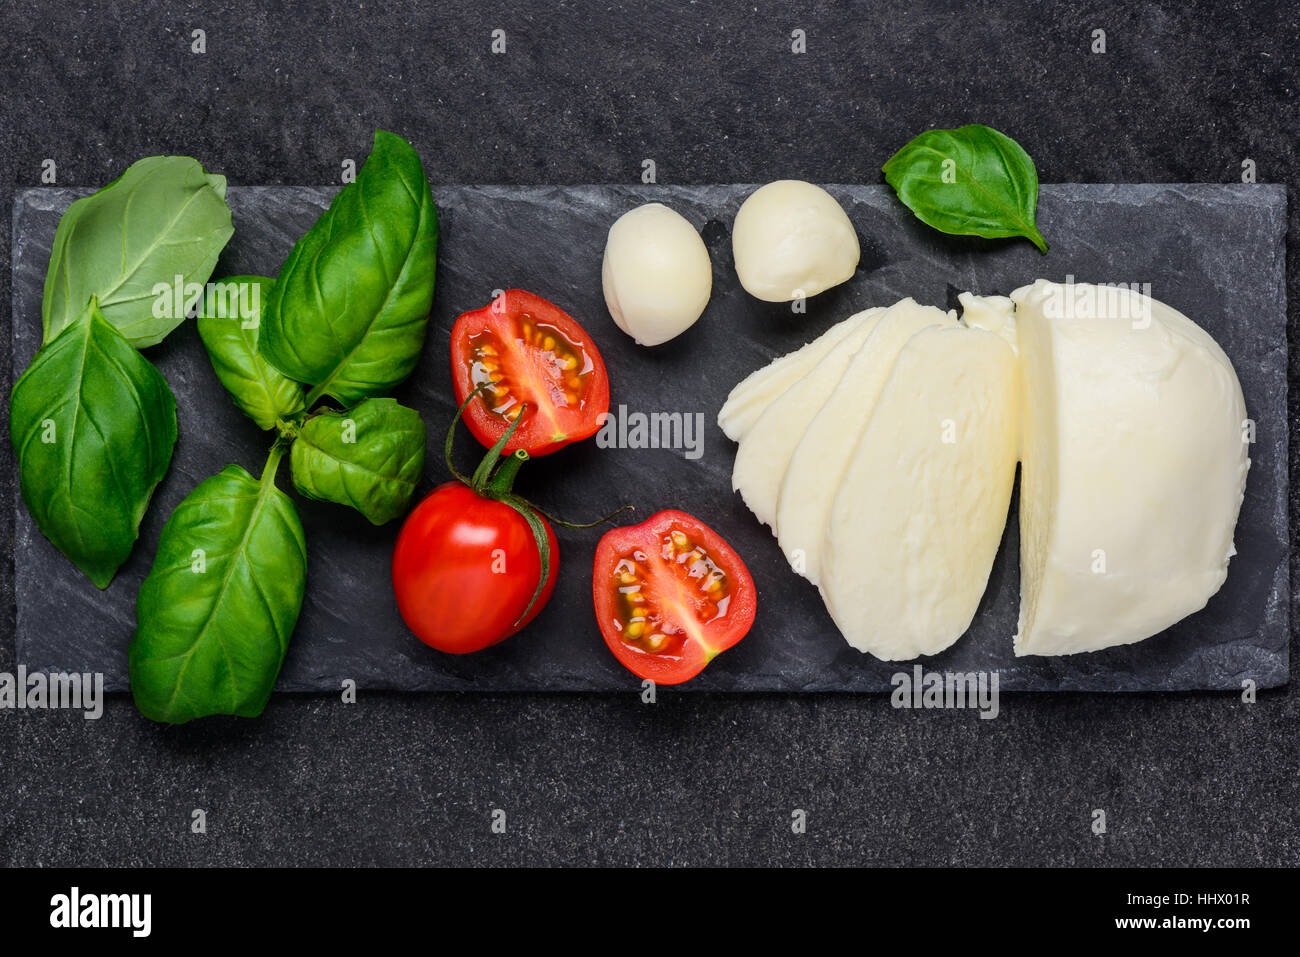 Green fresh leaves of basil with red tomato and Italian juicy mozzarella cheese Stock Photo